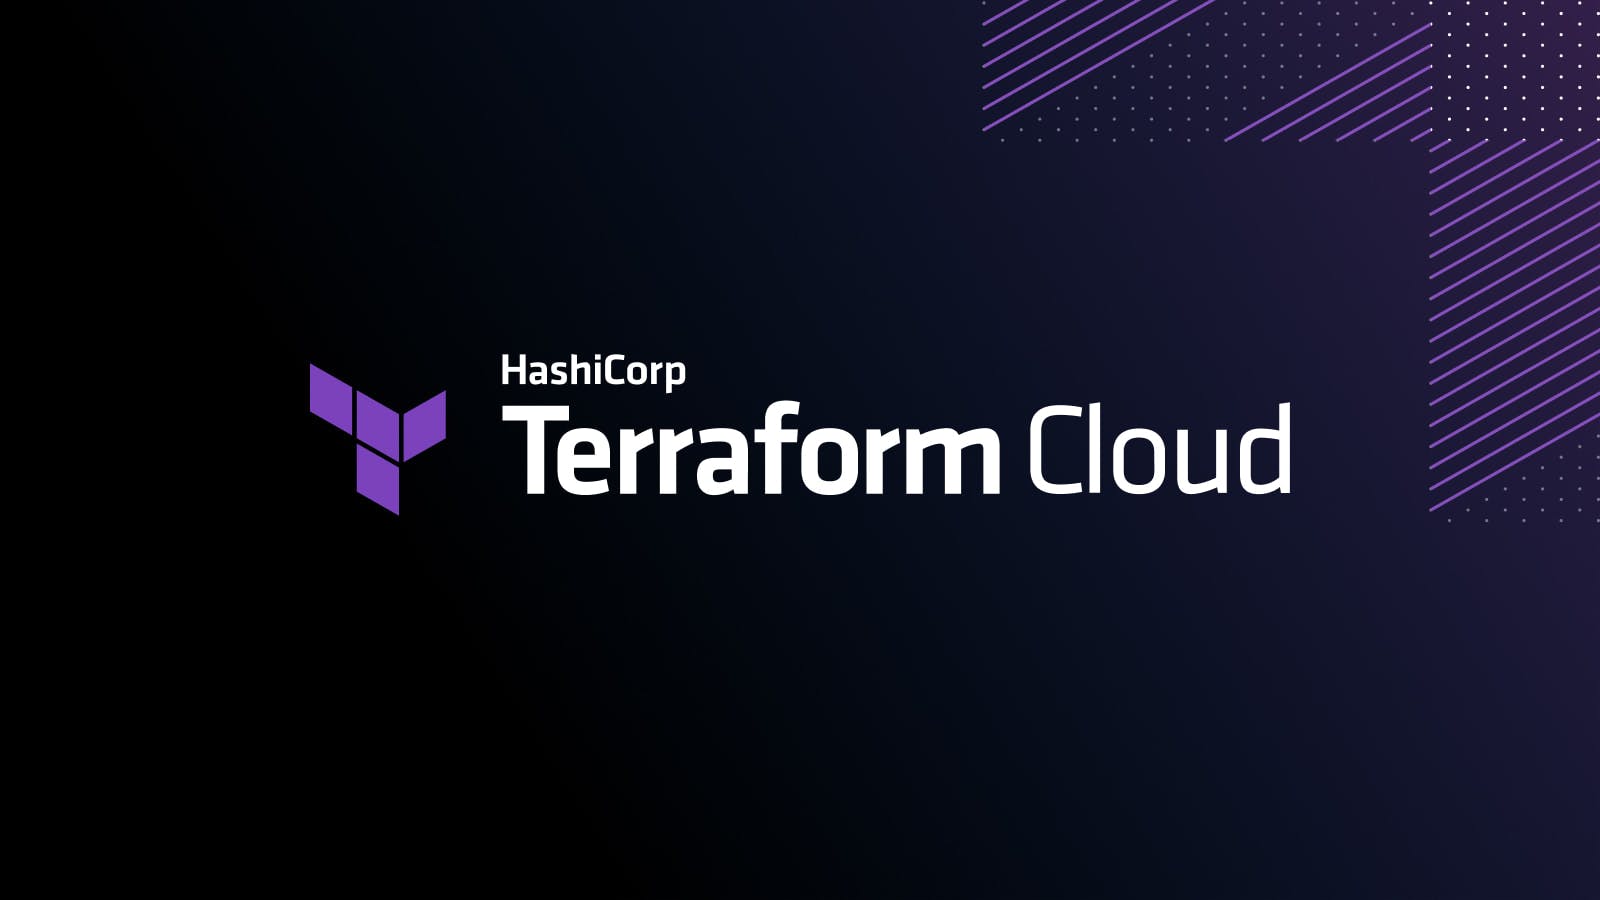 Terraform Cloud Adds Dynamic Provider Credentials for Vault and Official Cloud Providers